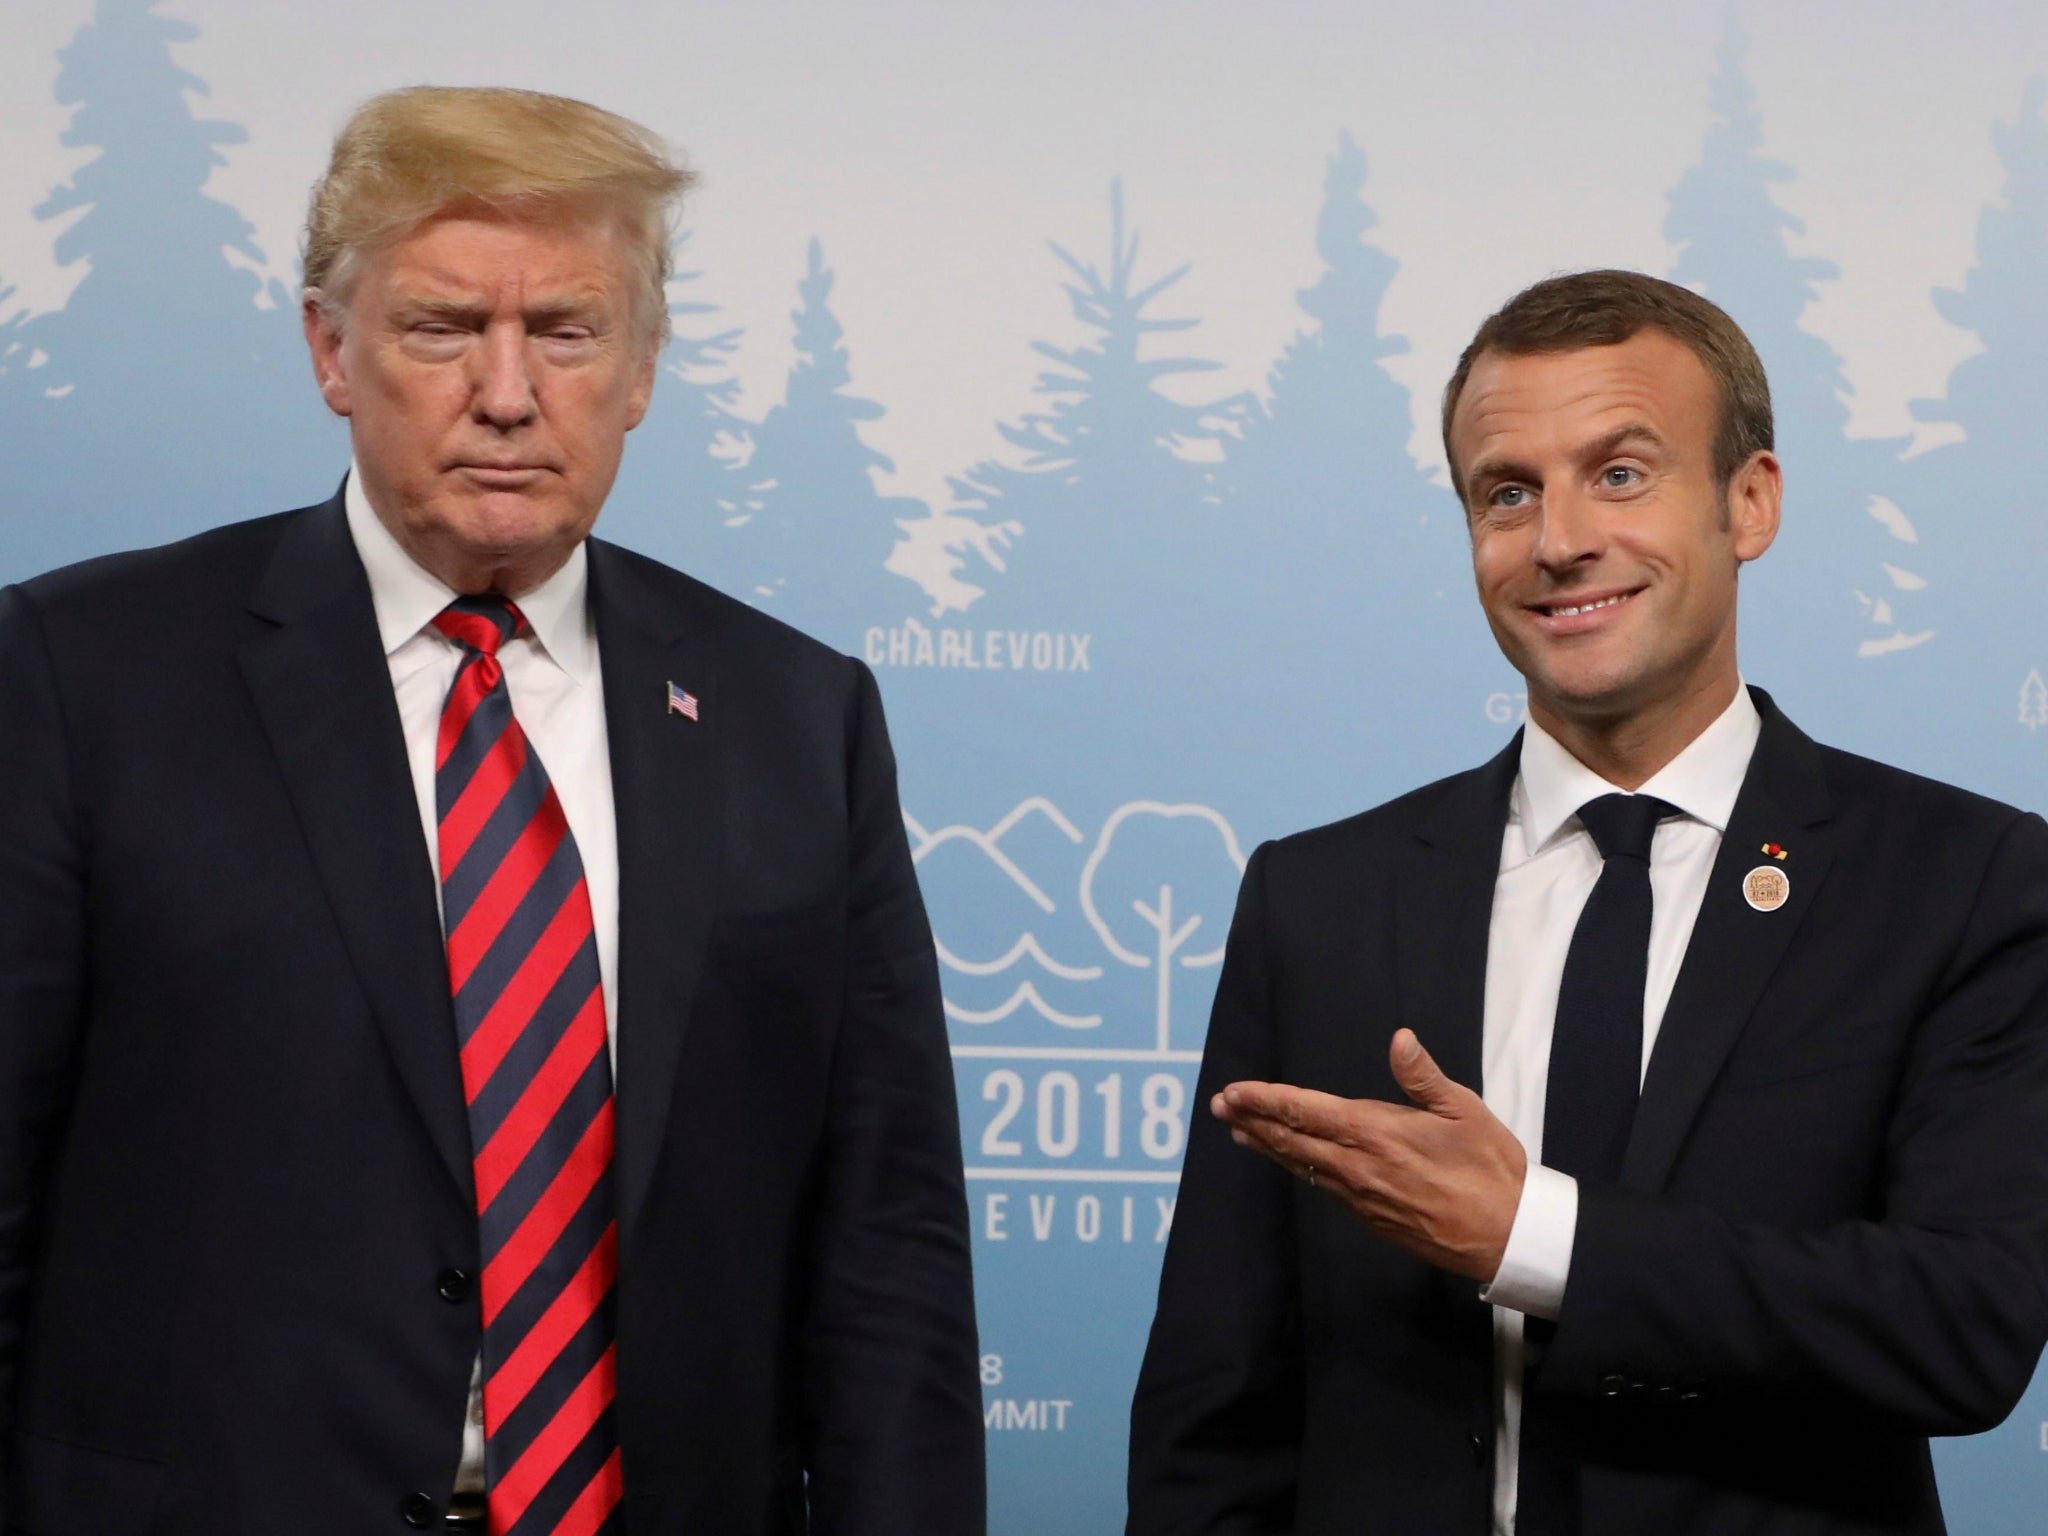 US President Donald Trump and French President Emmanuel Macron hold a meeting on the sidelines of the G7 Summit in La Malbaie, Quebec, Canada on 8 June 2018.